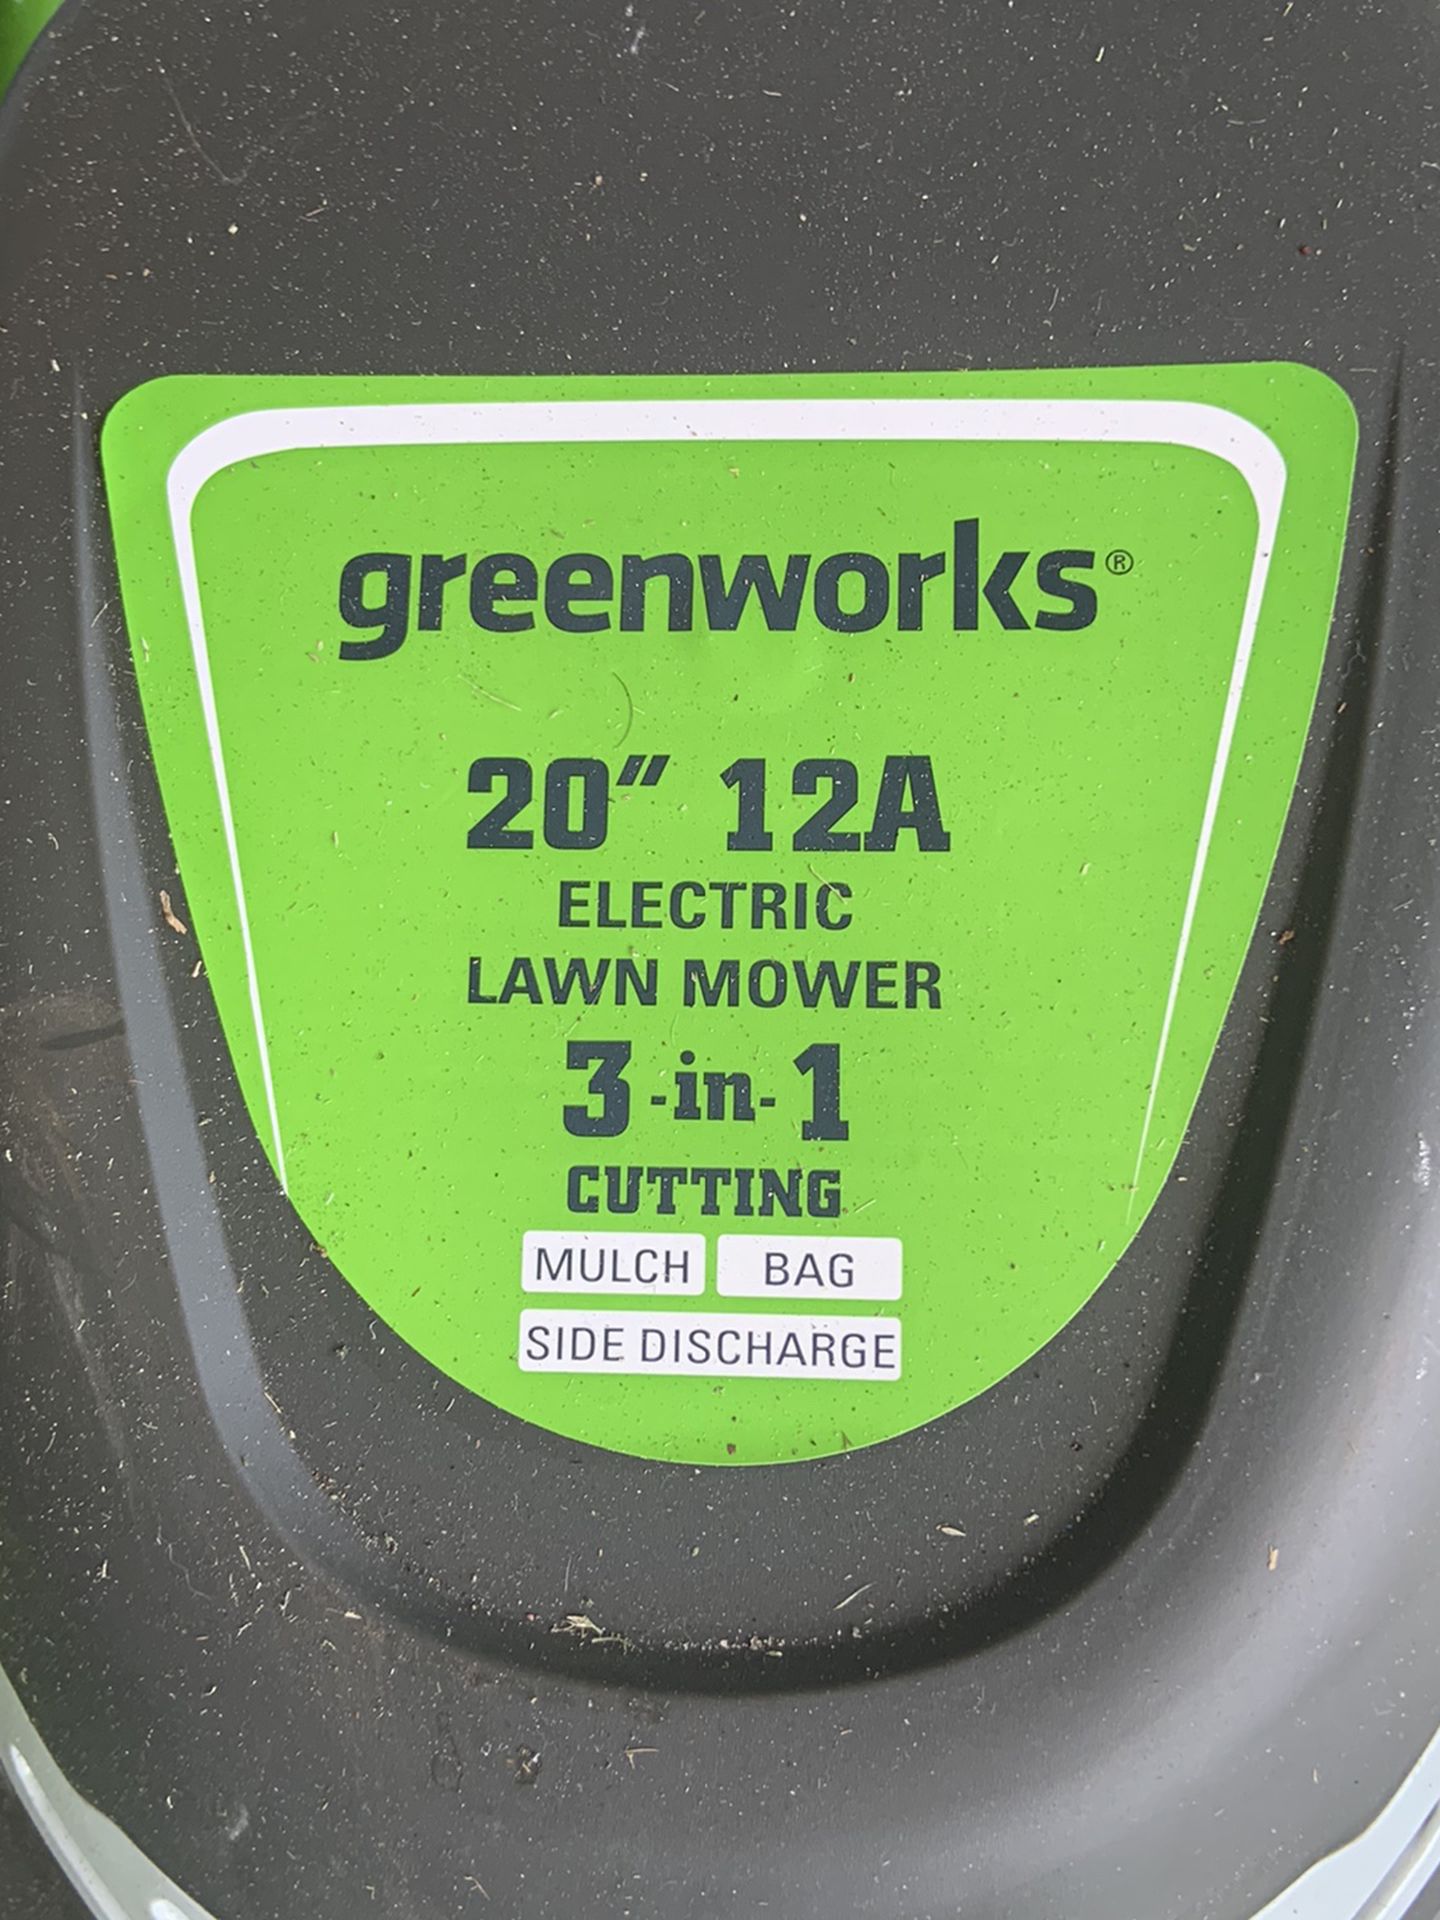 Electric lawnmower-Greenworks 20” 12A